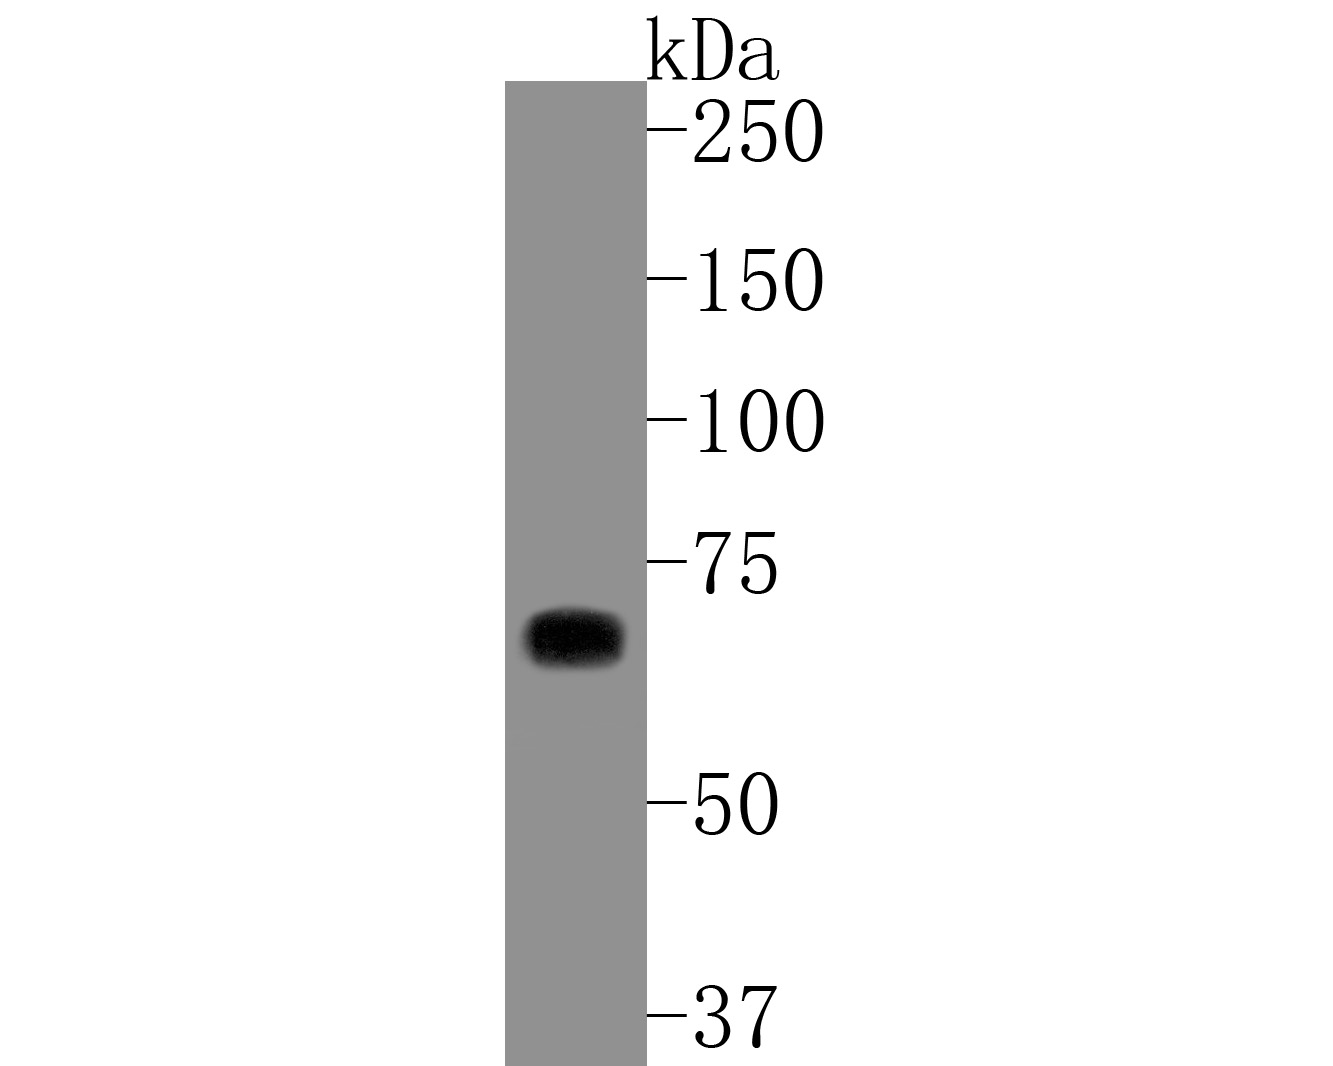 Western blot analysis of Themis on Jurkat cell lysates. Proteins were transferred to a PVDF membrane and blocked with 5% BSA in PBS for 1 hour at room temperature. The primary antibody (ET7111-20, 1/1,000) was used in 5% BSA at room temperature for 2 hours. Goat Anti-Rabbit IgG - HRP Secondary Antibody (HA1001) at 1:5,000 dilution was used for 1 hour at room temperature.